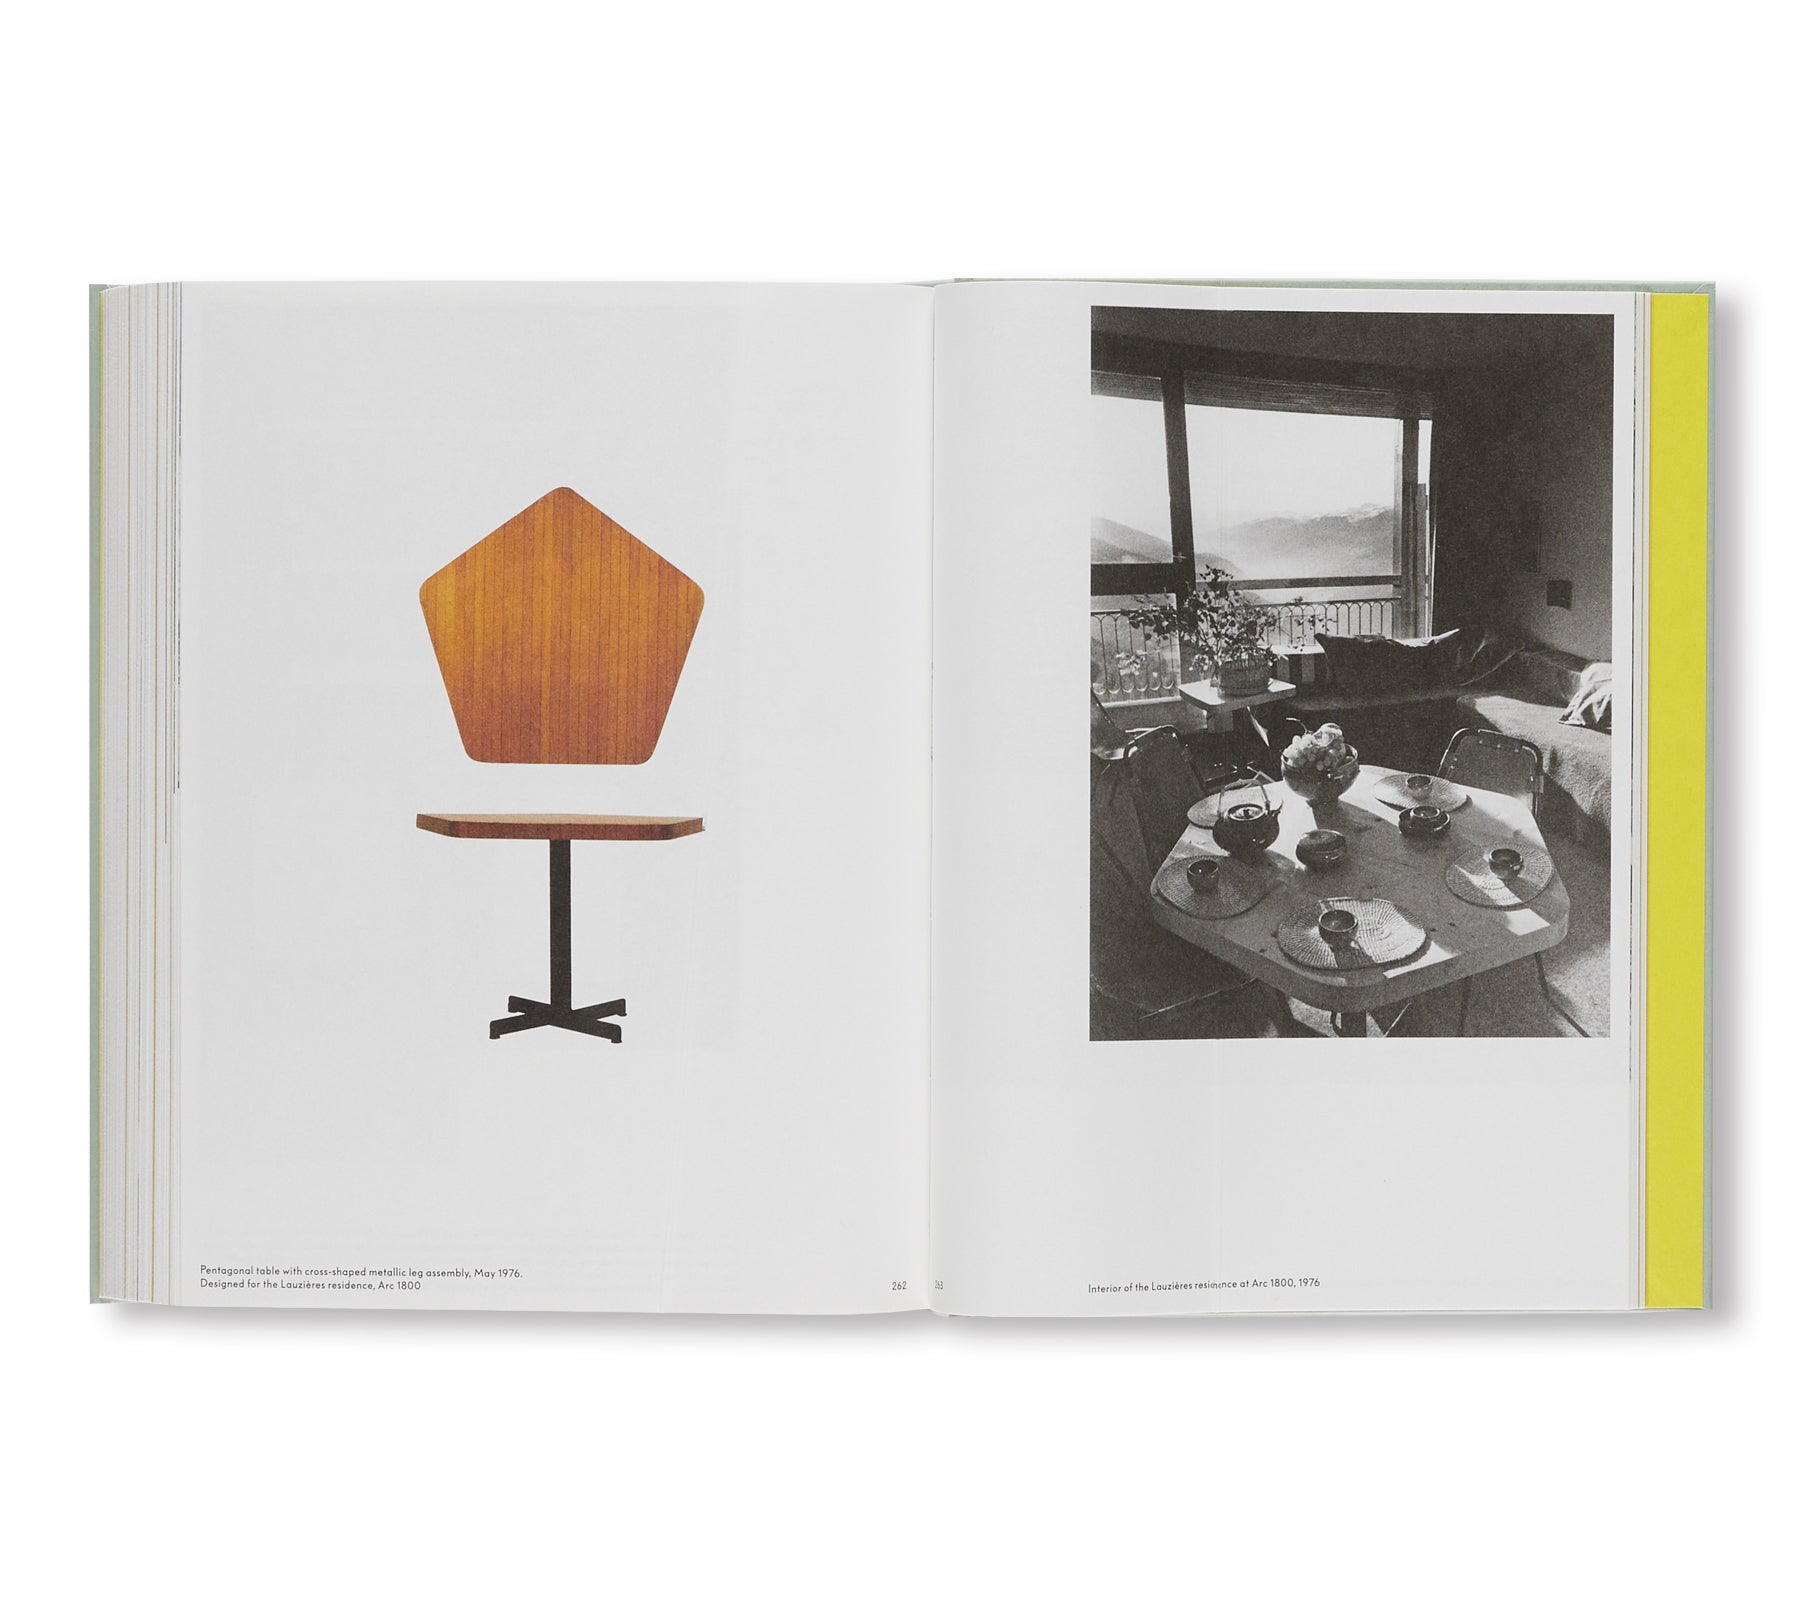 THE MODERN LIFE EXHIBITION CATALOGUE by Charlotte Perriand